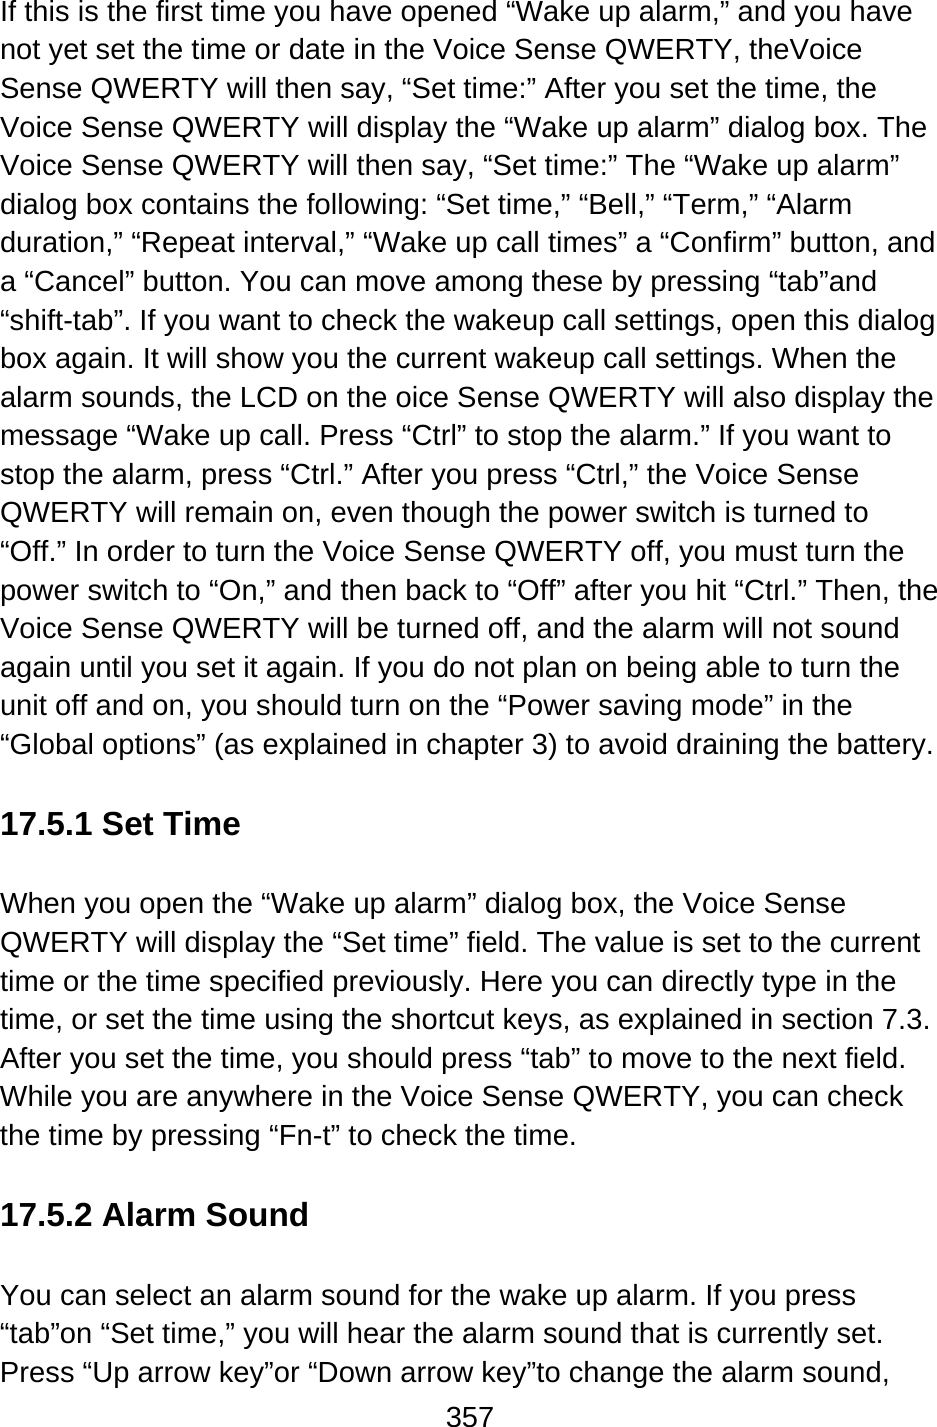 357  If this is the first time you have opened “Wake up alarm,” and you have not yet set the time or date in the Voice Sense QWERTY, theVoice Sense QWERTY will then say, “Set time:” After you set the time, the Voice Sense QWERTY will display the “Wake up alarm” dialog box. The Voice Sense QWERTY will then say, “Set time:” The “Wake up alarm” dialog box contains the following: “Set time,” “Bell,” “Term,” “Alarm duration,” “Repeat interval,” “Wake up call times” a “Confirm” button, and a “Cancel” button. You can move among these by pressing “tab”and “shift-tab”. If you want to check the wakeup call settings, open this dialog box again. It will show you the current wakeup call settings. When the alarm sounds, the LCD on the oice Sense QWERTY will also display the message “Wake up call. Press “Ctrl” to stop the alarm.” If you want to stop the alarm, press “Ctrl.” After you press “Ctrl,” the Voice Sense QWERTY will remain on, even though the power switch is turned to “Off.” In order to turn the Voice Sense QWERTY off, you must turn the power switch to “On,” and then back to “Off” after you hit “Ctrl.” Then, the Voice Sense QWERTY will be turned off, and the alarm will not sound again until you set it again. If you do not plan on being able to turn the unit off and on, you should turn on the “Power saving mode” in the “Global options” (as explained in chapter 3) to avoid draining the battery.  17.5.1 Set Time  When you open the “Wake up alarm” dialog box, the Voice Sense QWERTY will display the “Set time” field. The value is set to the current time or the time specified previously. Here you can directly type in the time, or set the time using the shortcut keys, as explained in section 7.3.   After you set the time, you should press “tab” to move to the next field.   While you are anywhere in the Voice Sense QWERTY, you can check the time by pressing “Fn-t” to check the time.  17.5.2 Alarm Sound  You can select an alarm sound for the wake up alarm. If you press “tab”on “Set time,” you will hear the alarm sound that is currently set.   Press “Up arrow key”or “Down arrow key”to change the alarm sound, 